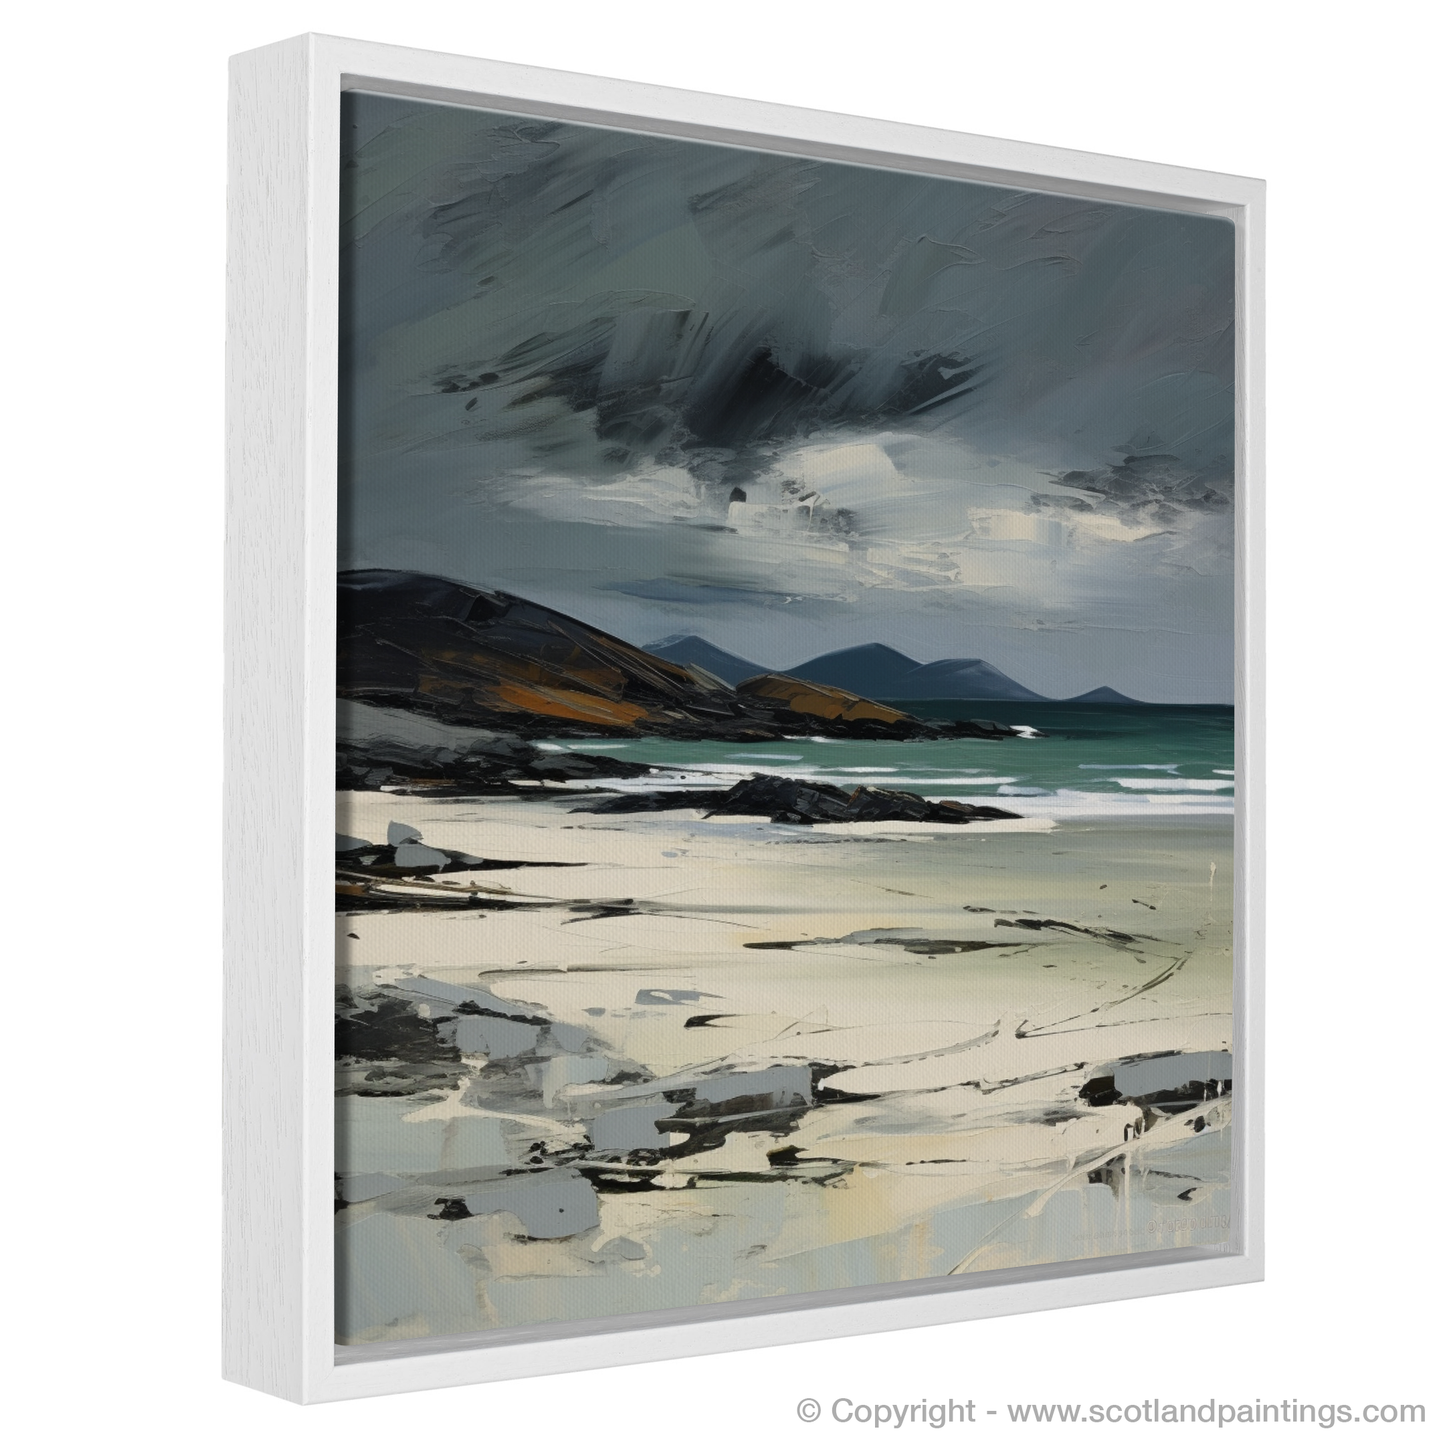 Painting and Art Print of Traigh Mhor, Isle of Barra entitled "Wild Shores of Traigh Mhor".